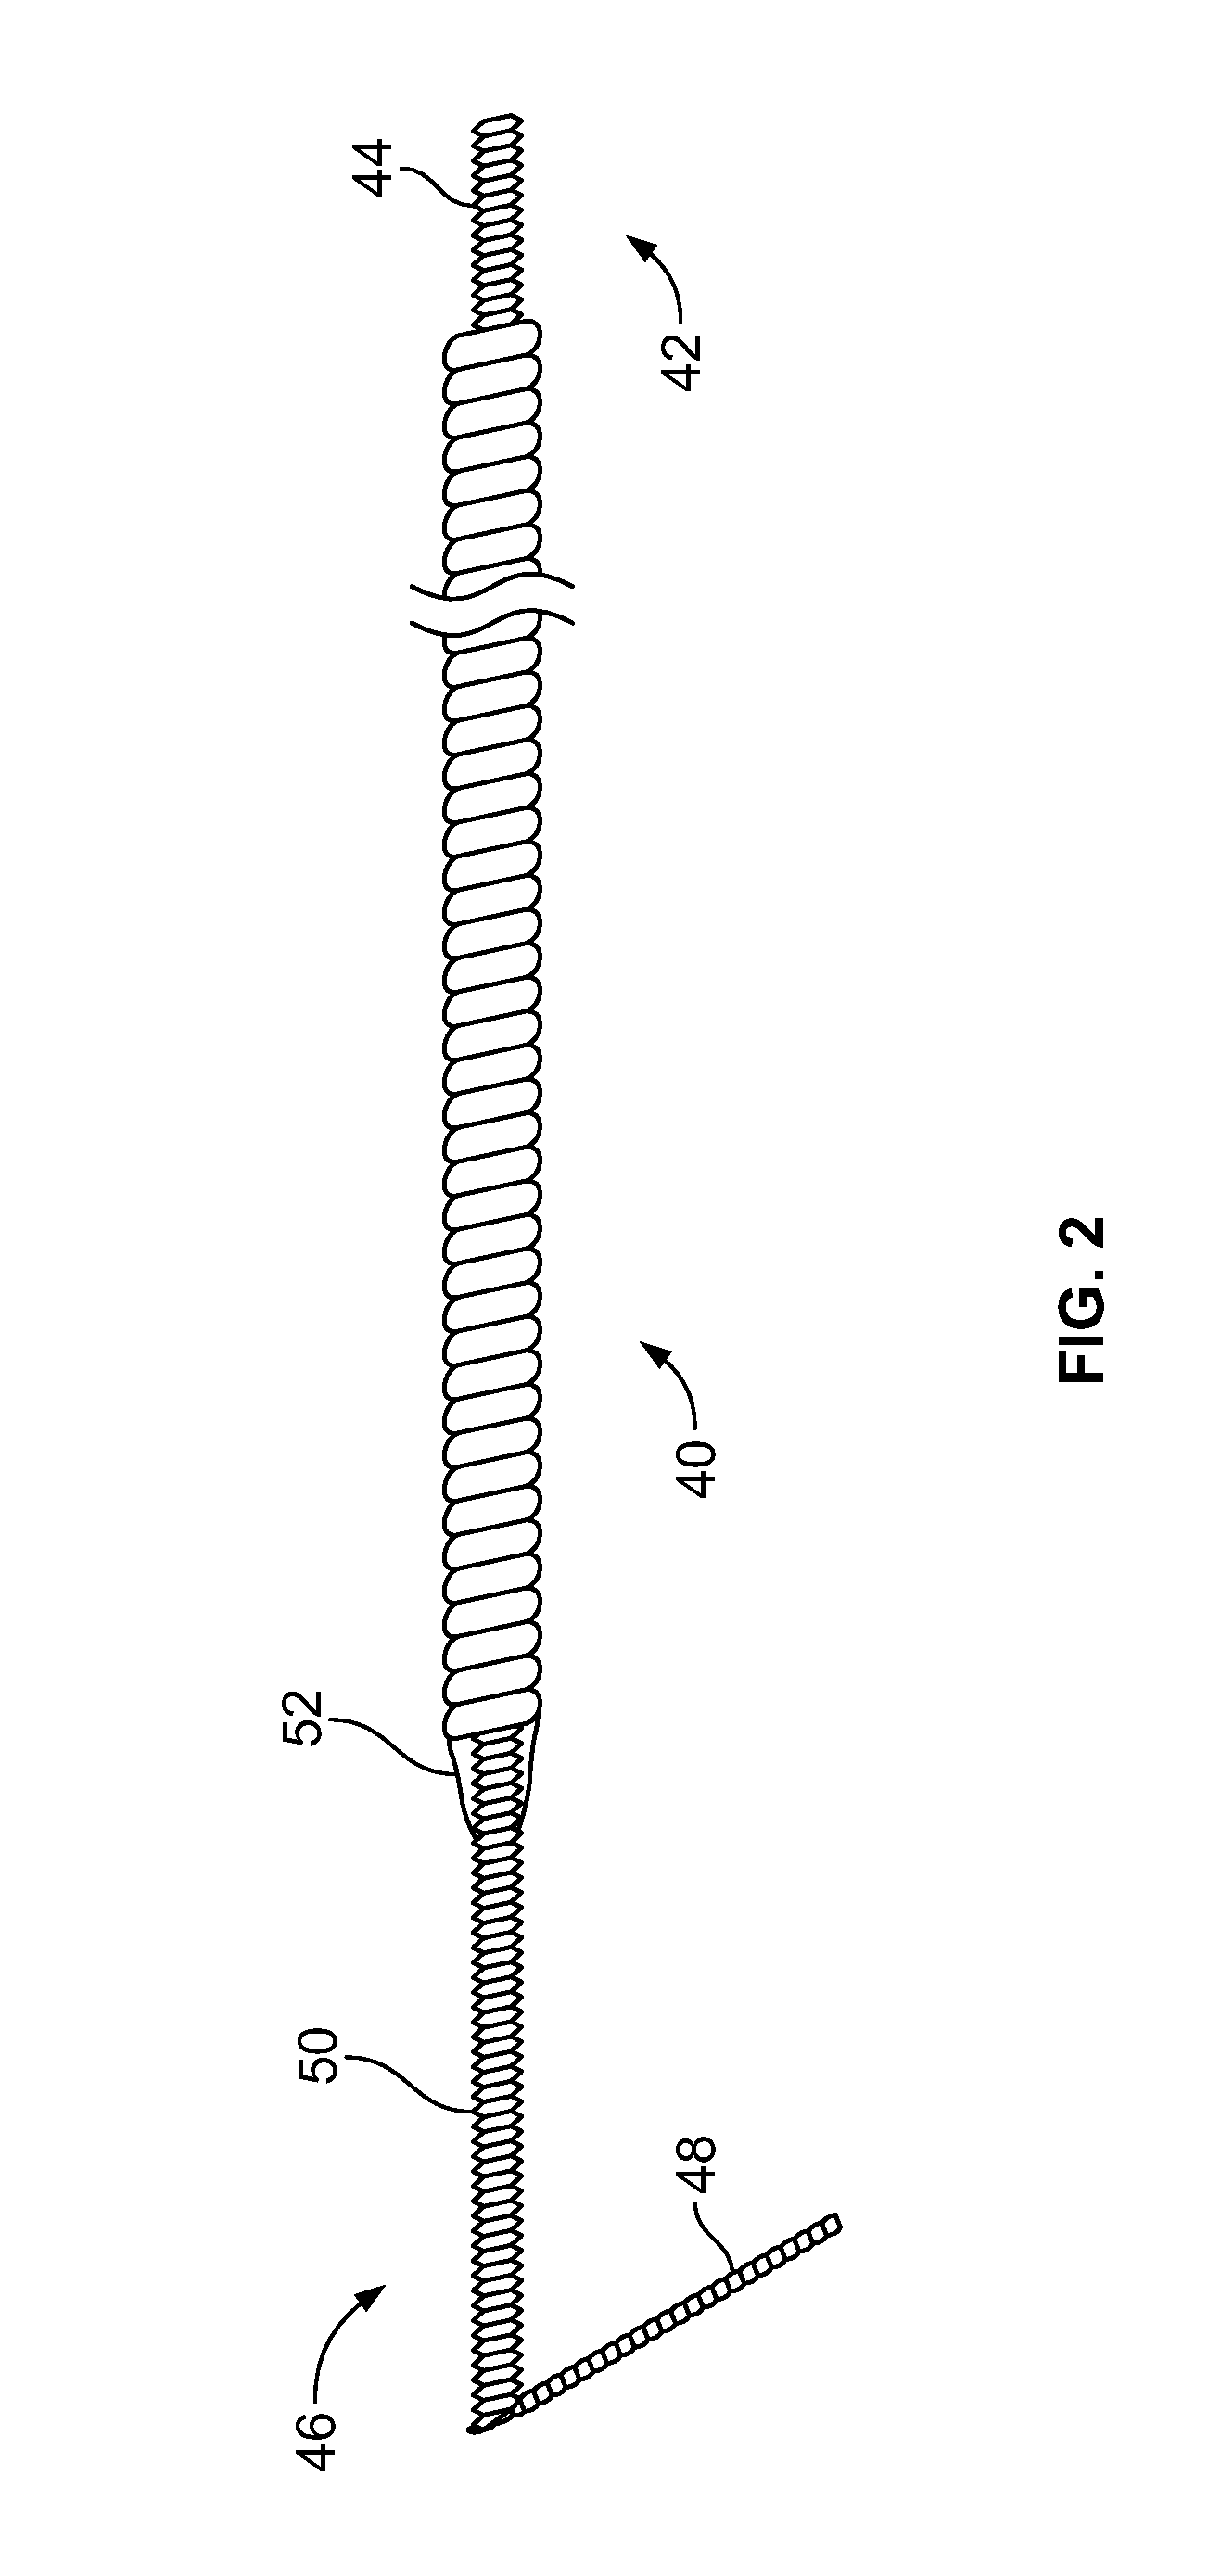 Systems and methods related to the treatment of back pain